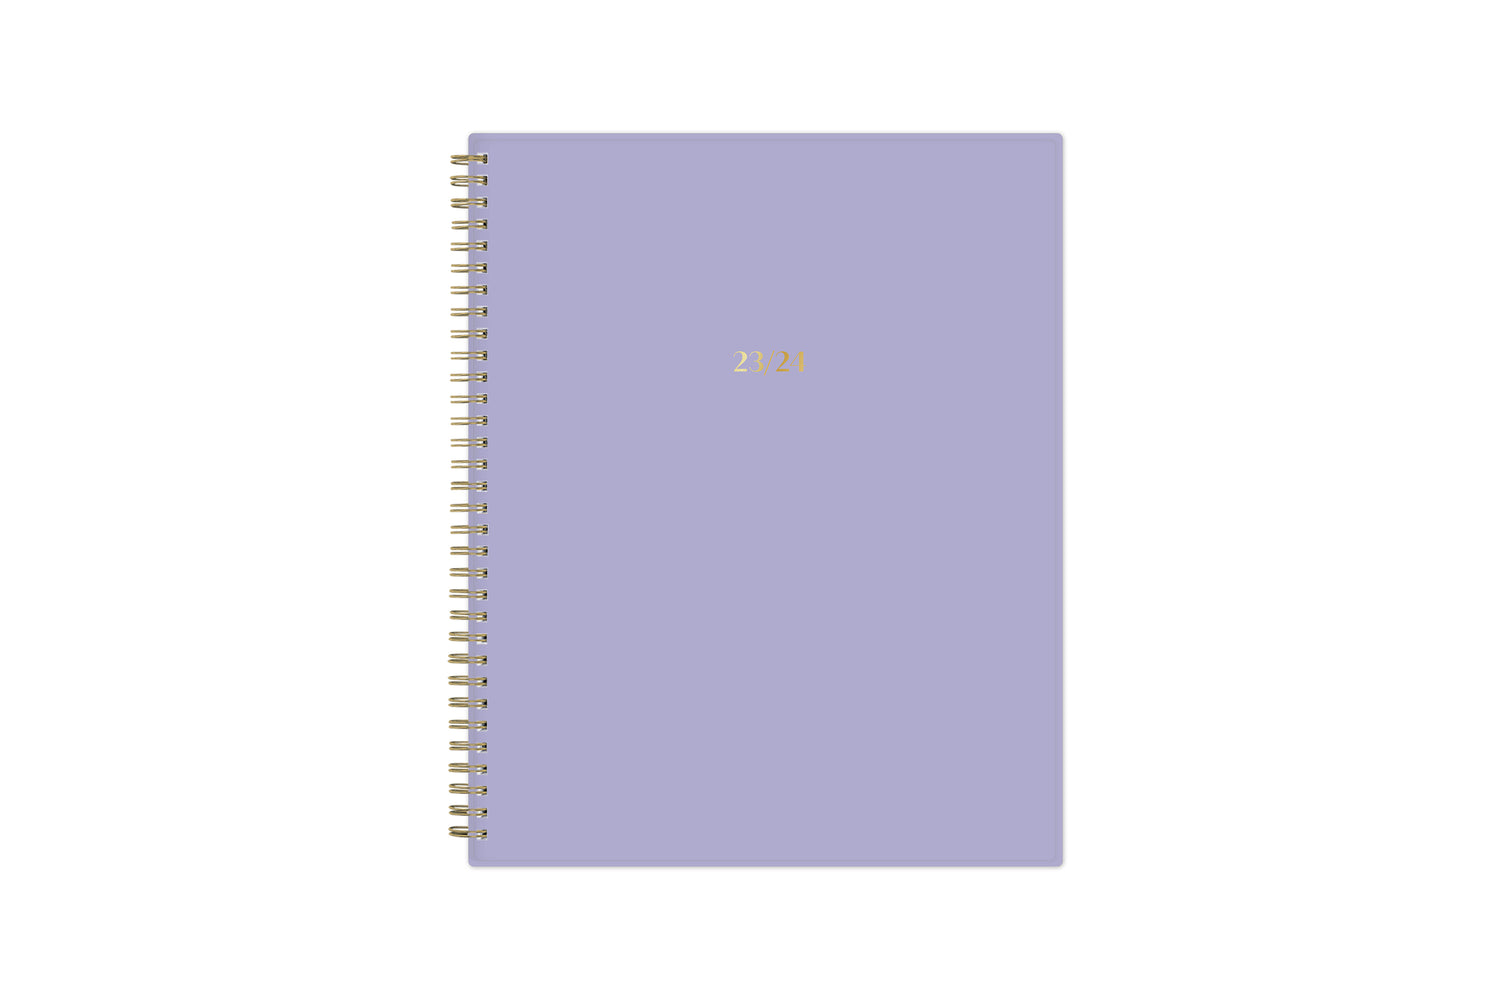 23/24 printed academic year, solid lavender front cover, in 8.5x11 planner size